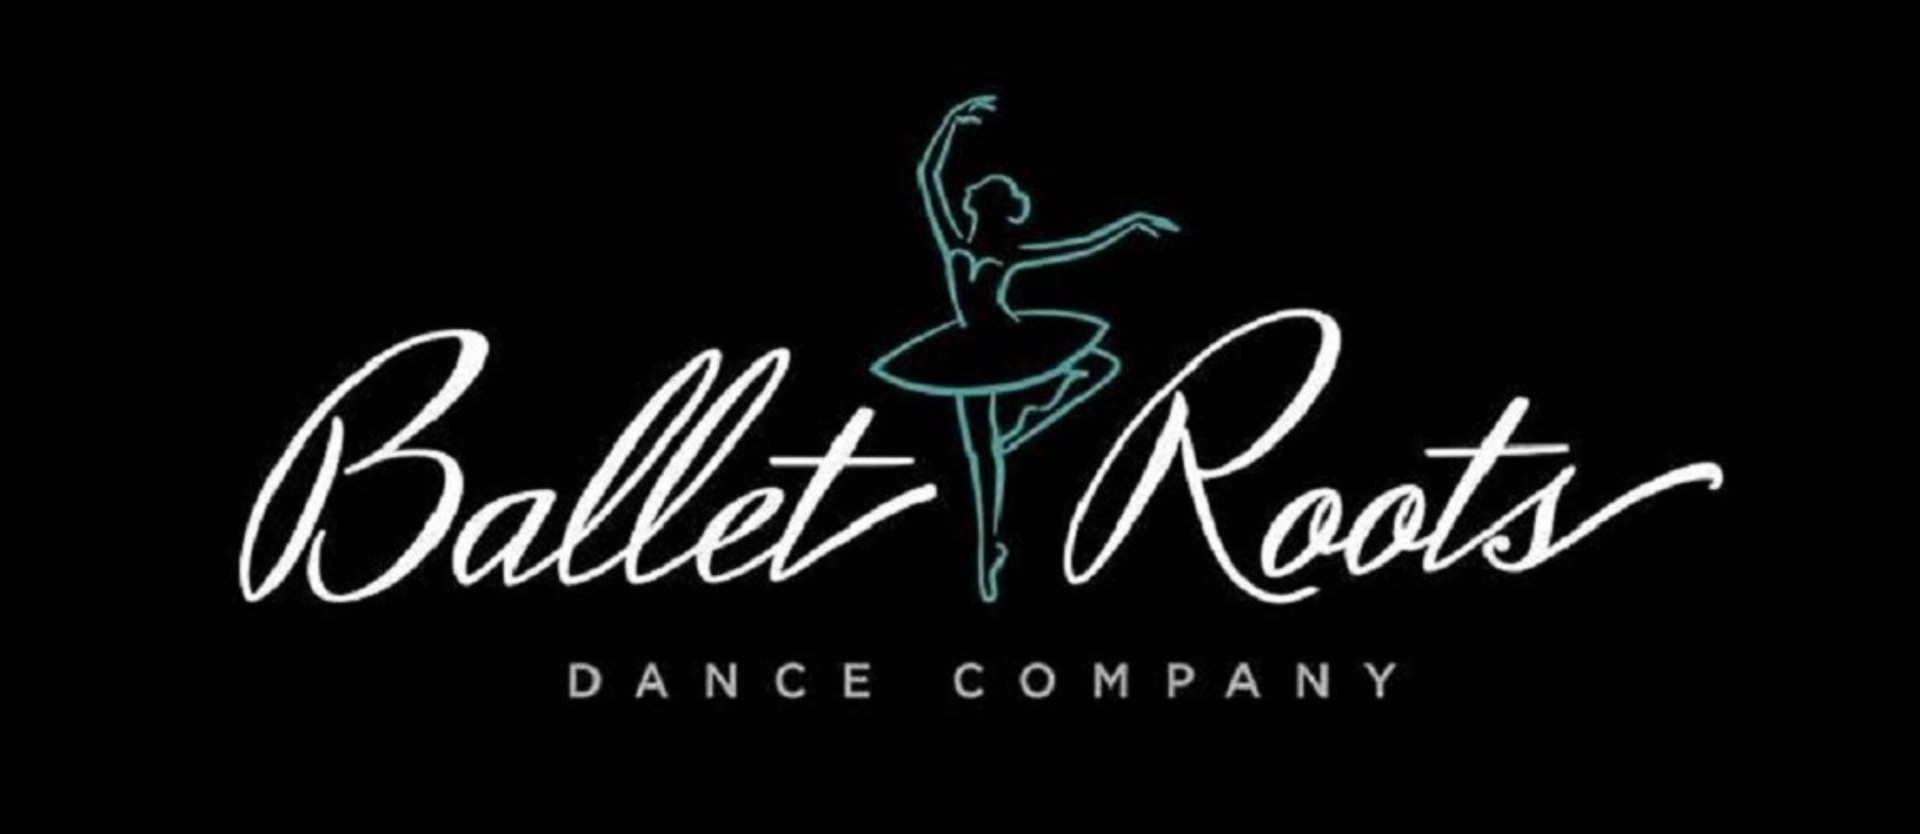 Ballet Roots Dance Company - Debut Performance